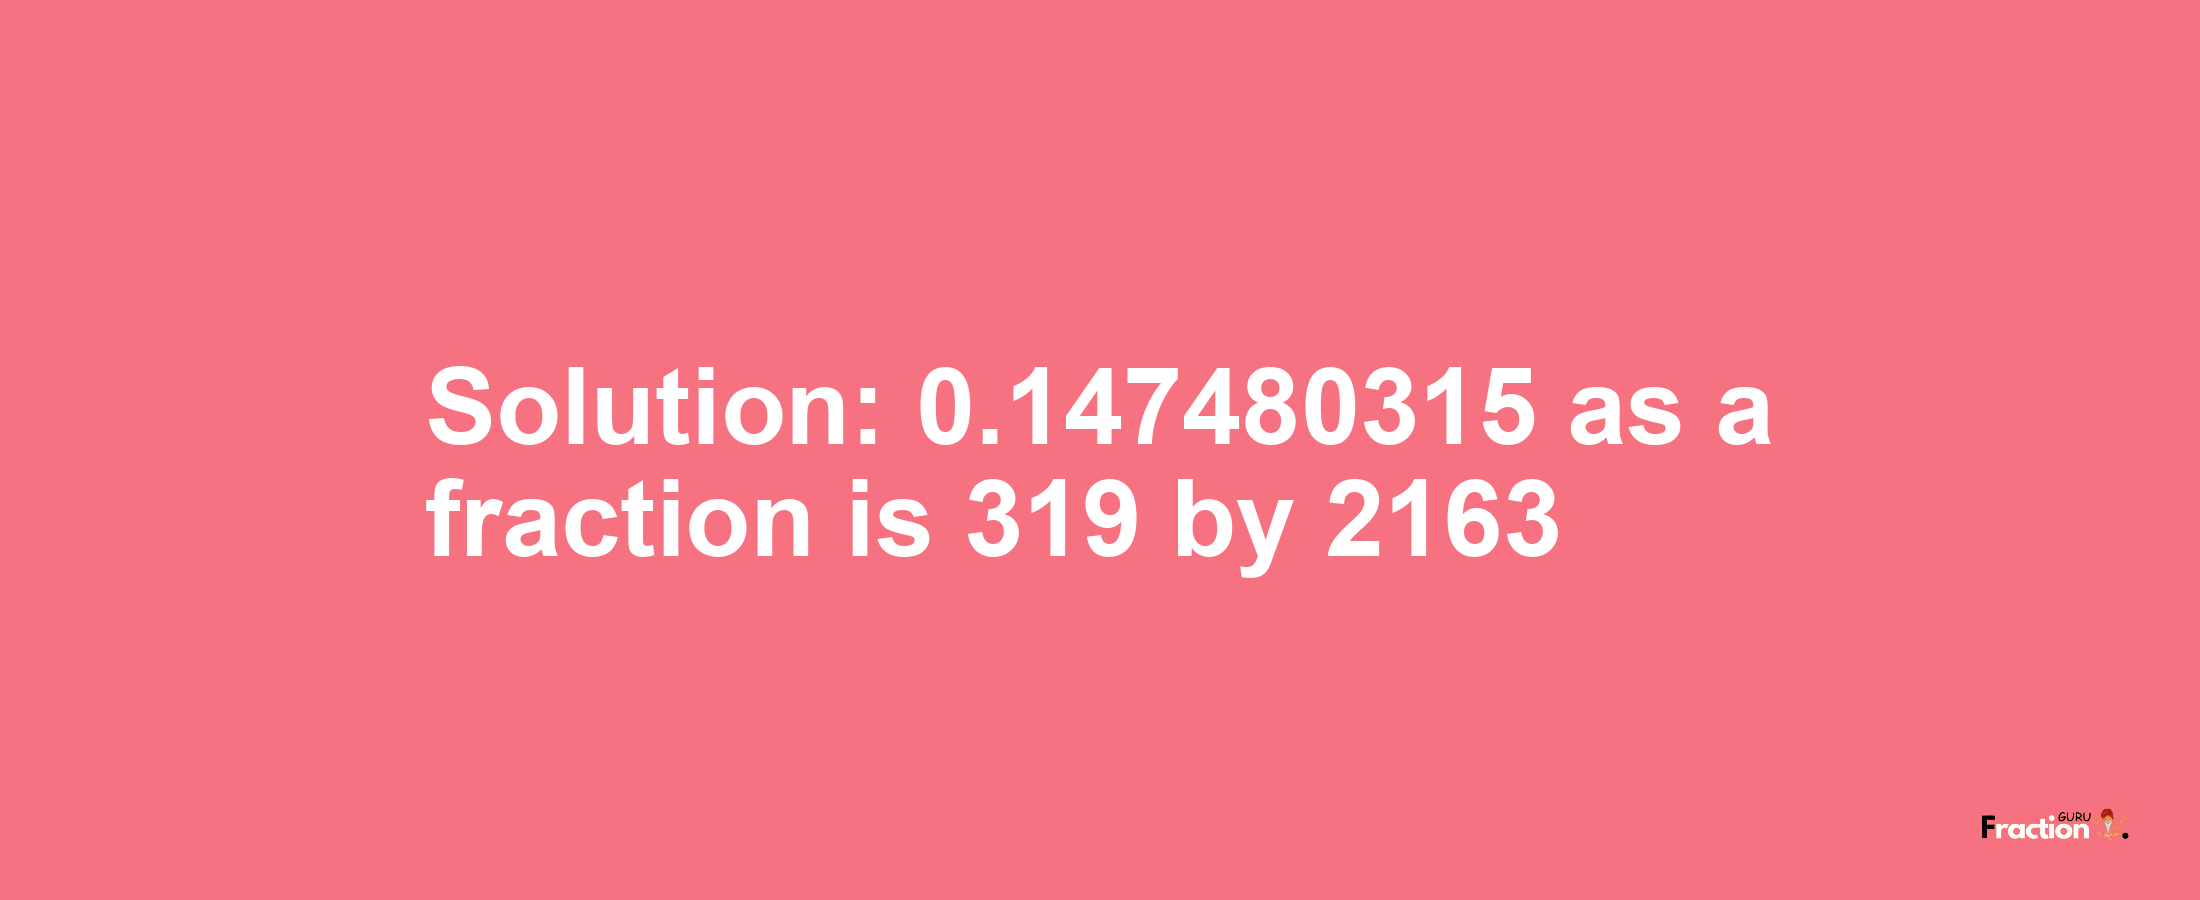 Solution:0.147480315 as a fraction is 319/2163